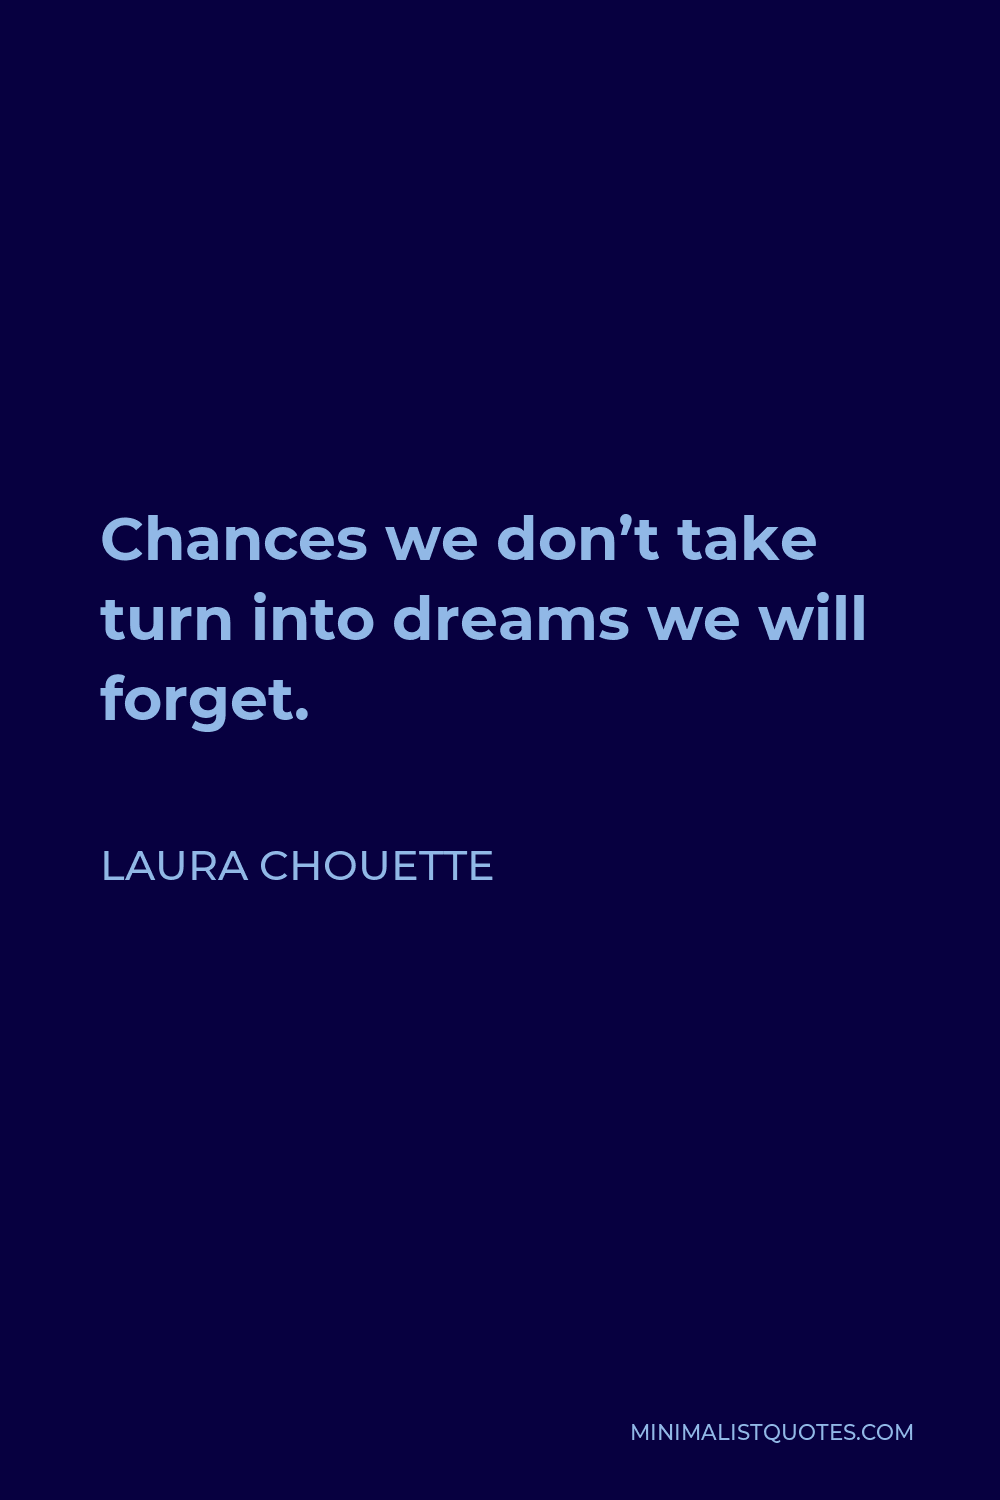 Laura Chouette Quote - Chances we don’t take turn into dreams we will forget.